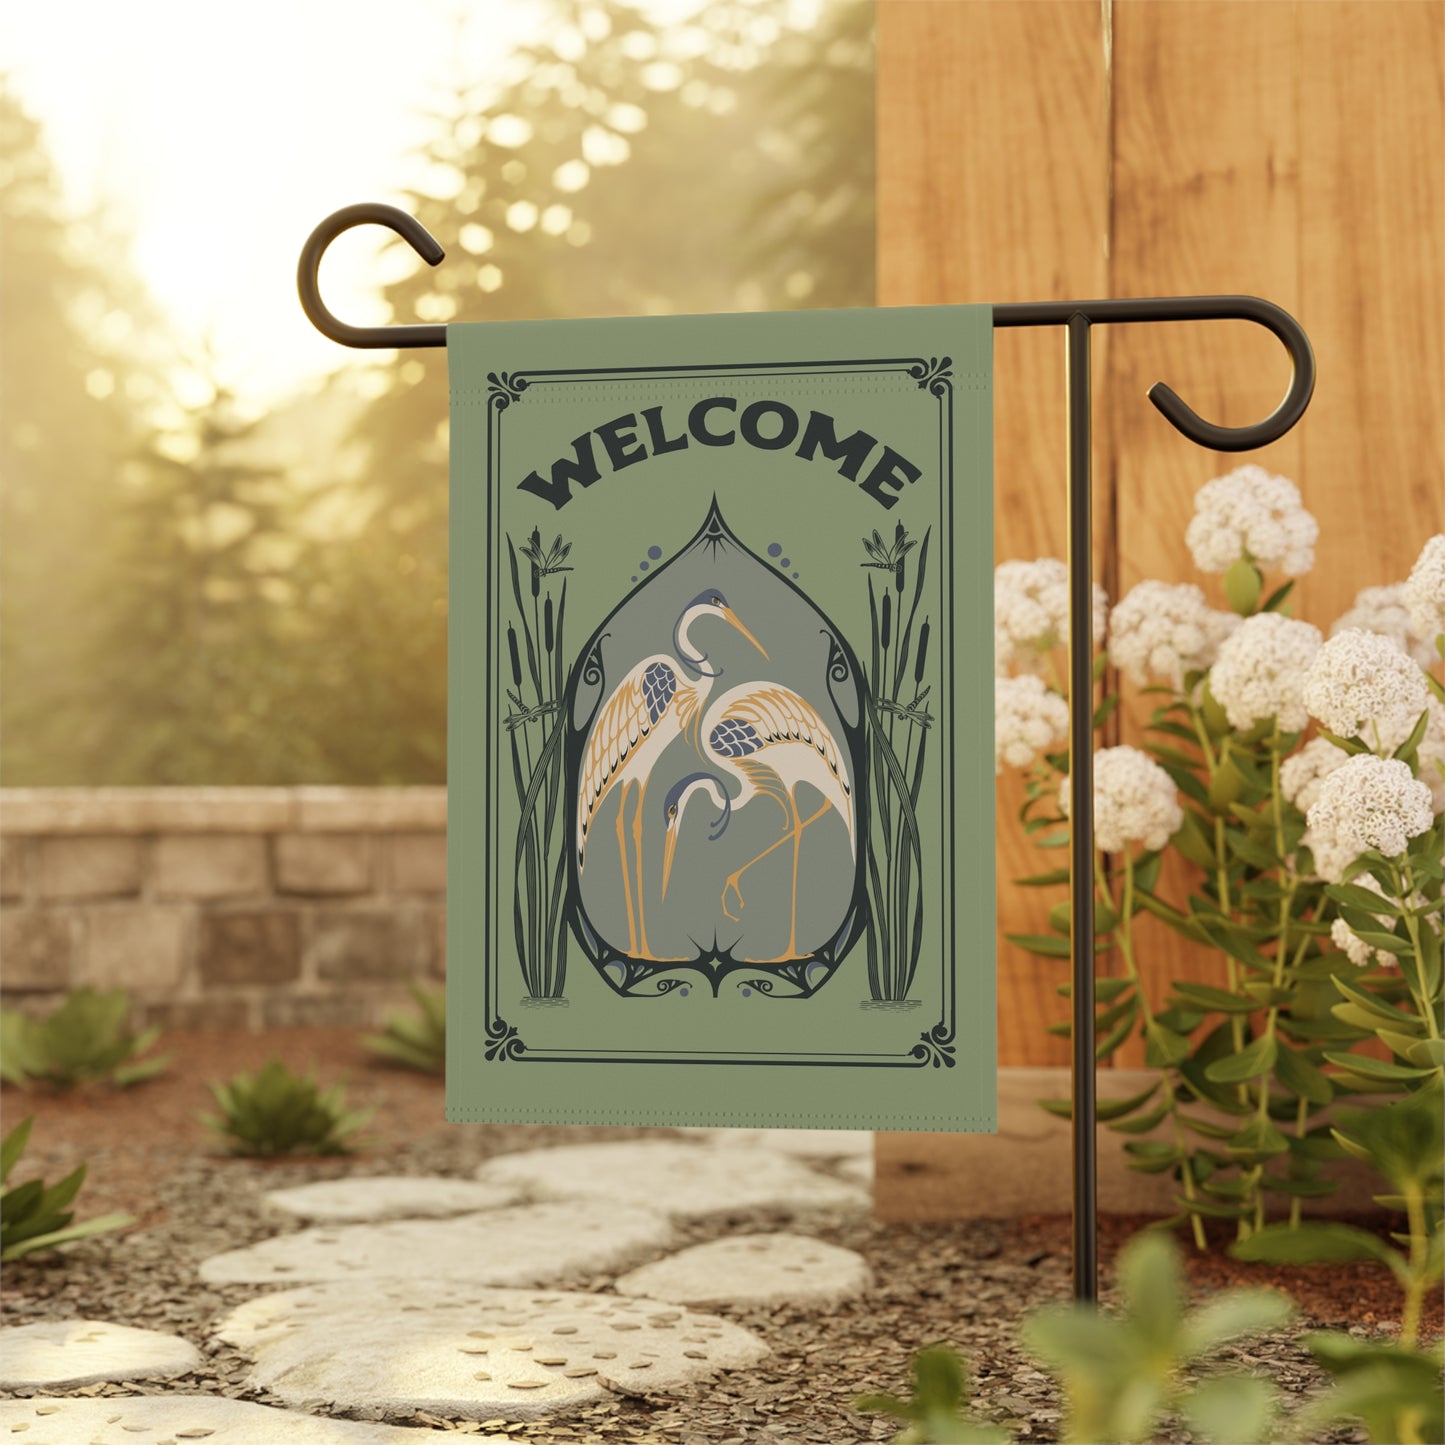 Welcome Flag House Banner, Earth Positivity Garden Message for Conservation of Birds, Bees, Butterflies, and Native Ecosystems